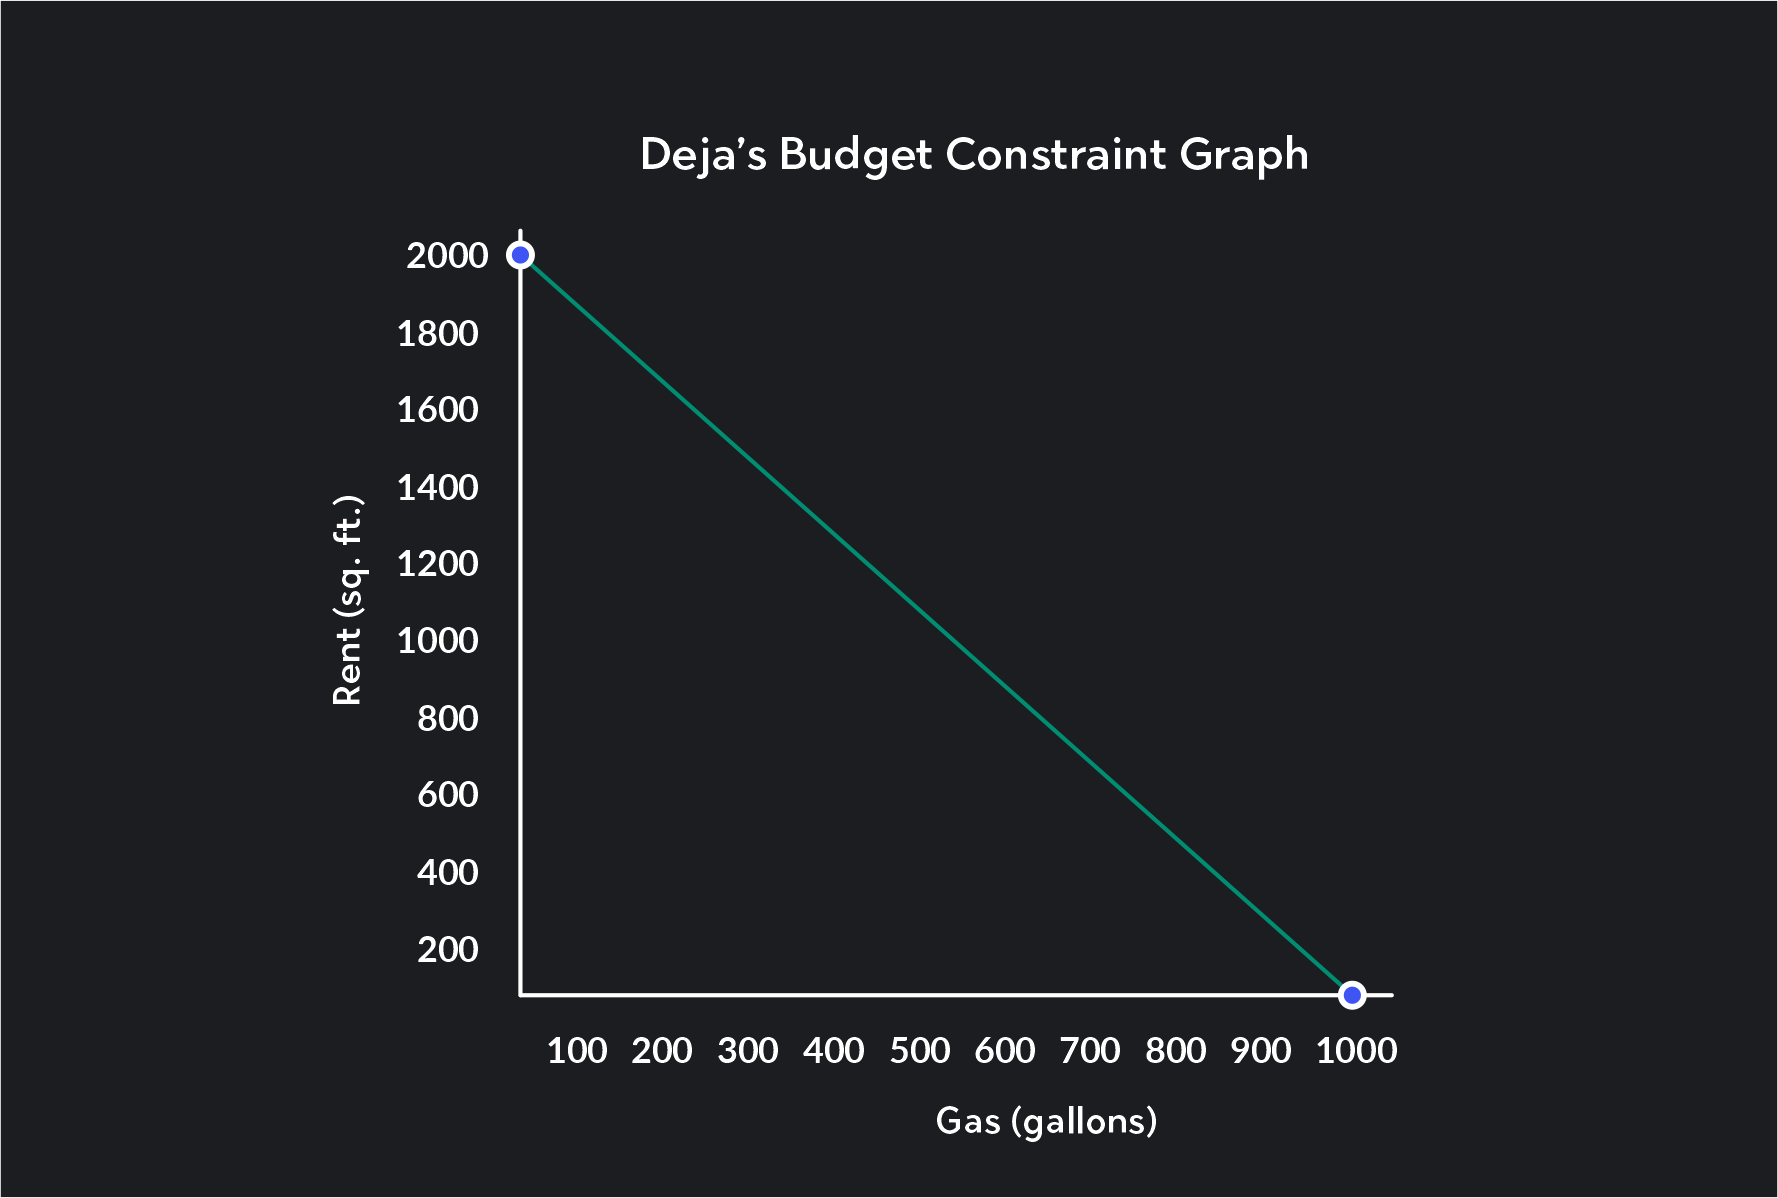 Budget Constraint graph for gas and rent